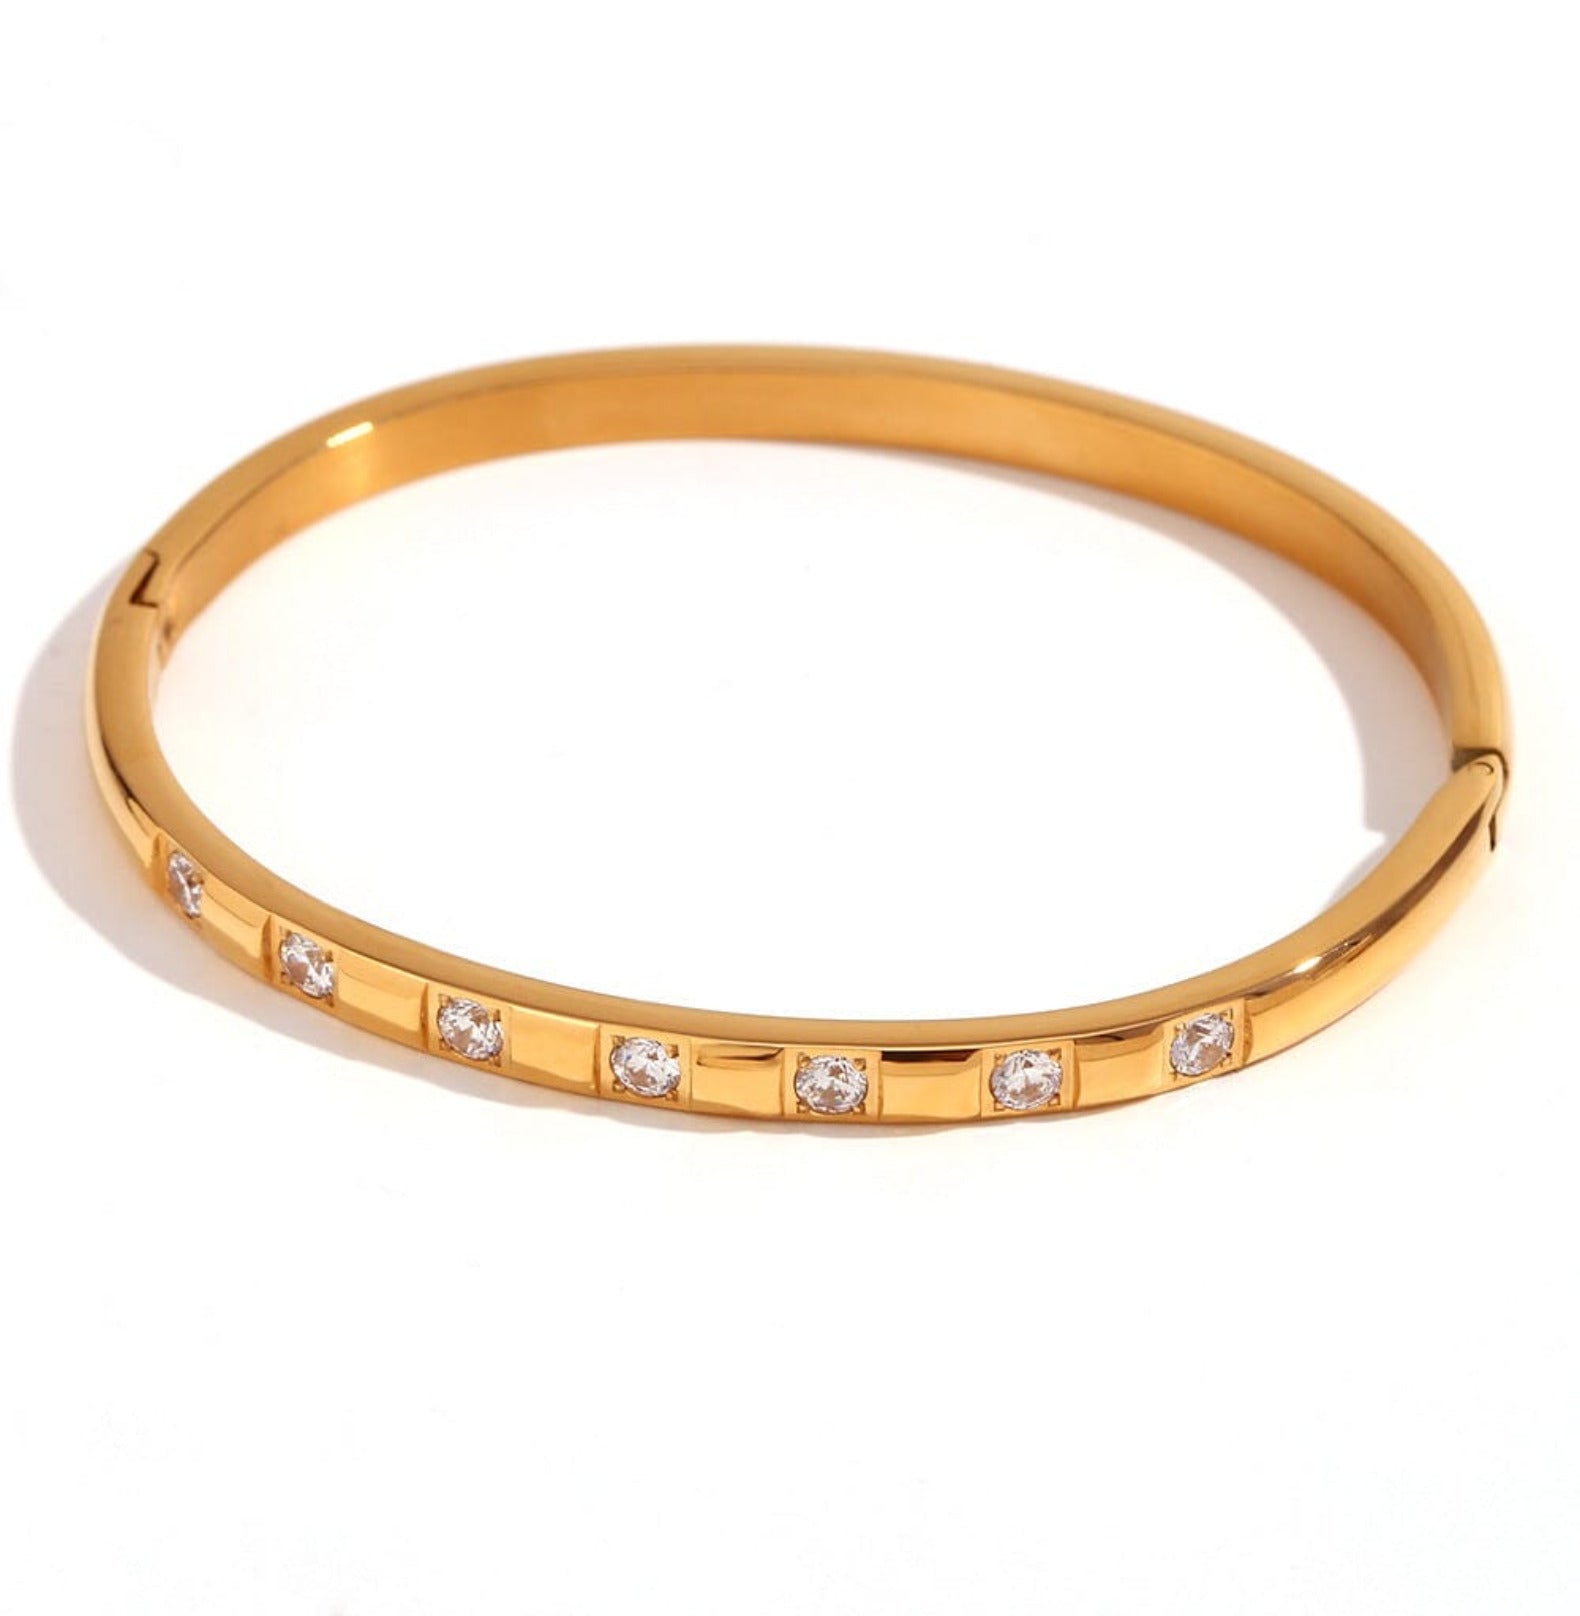 RECTANGLE ZIRCON BANGLE braclet Yubama Jewelry Online Store - The Elegant Designs of Gold and Silver ! 